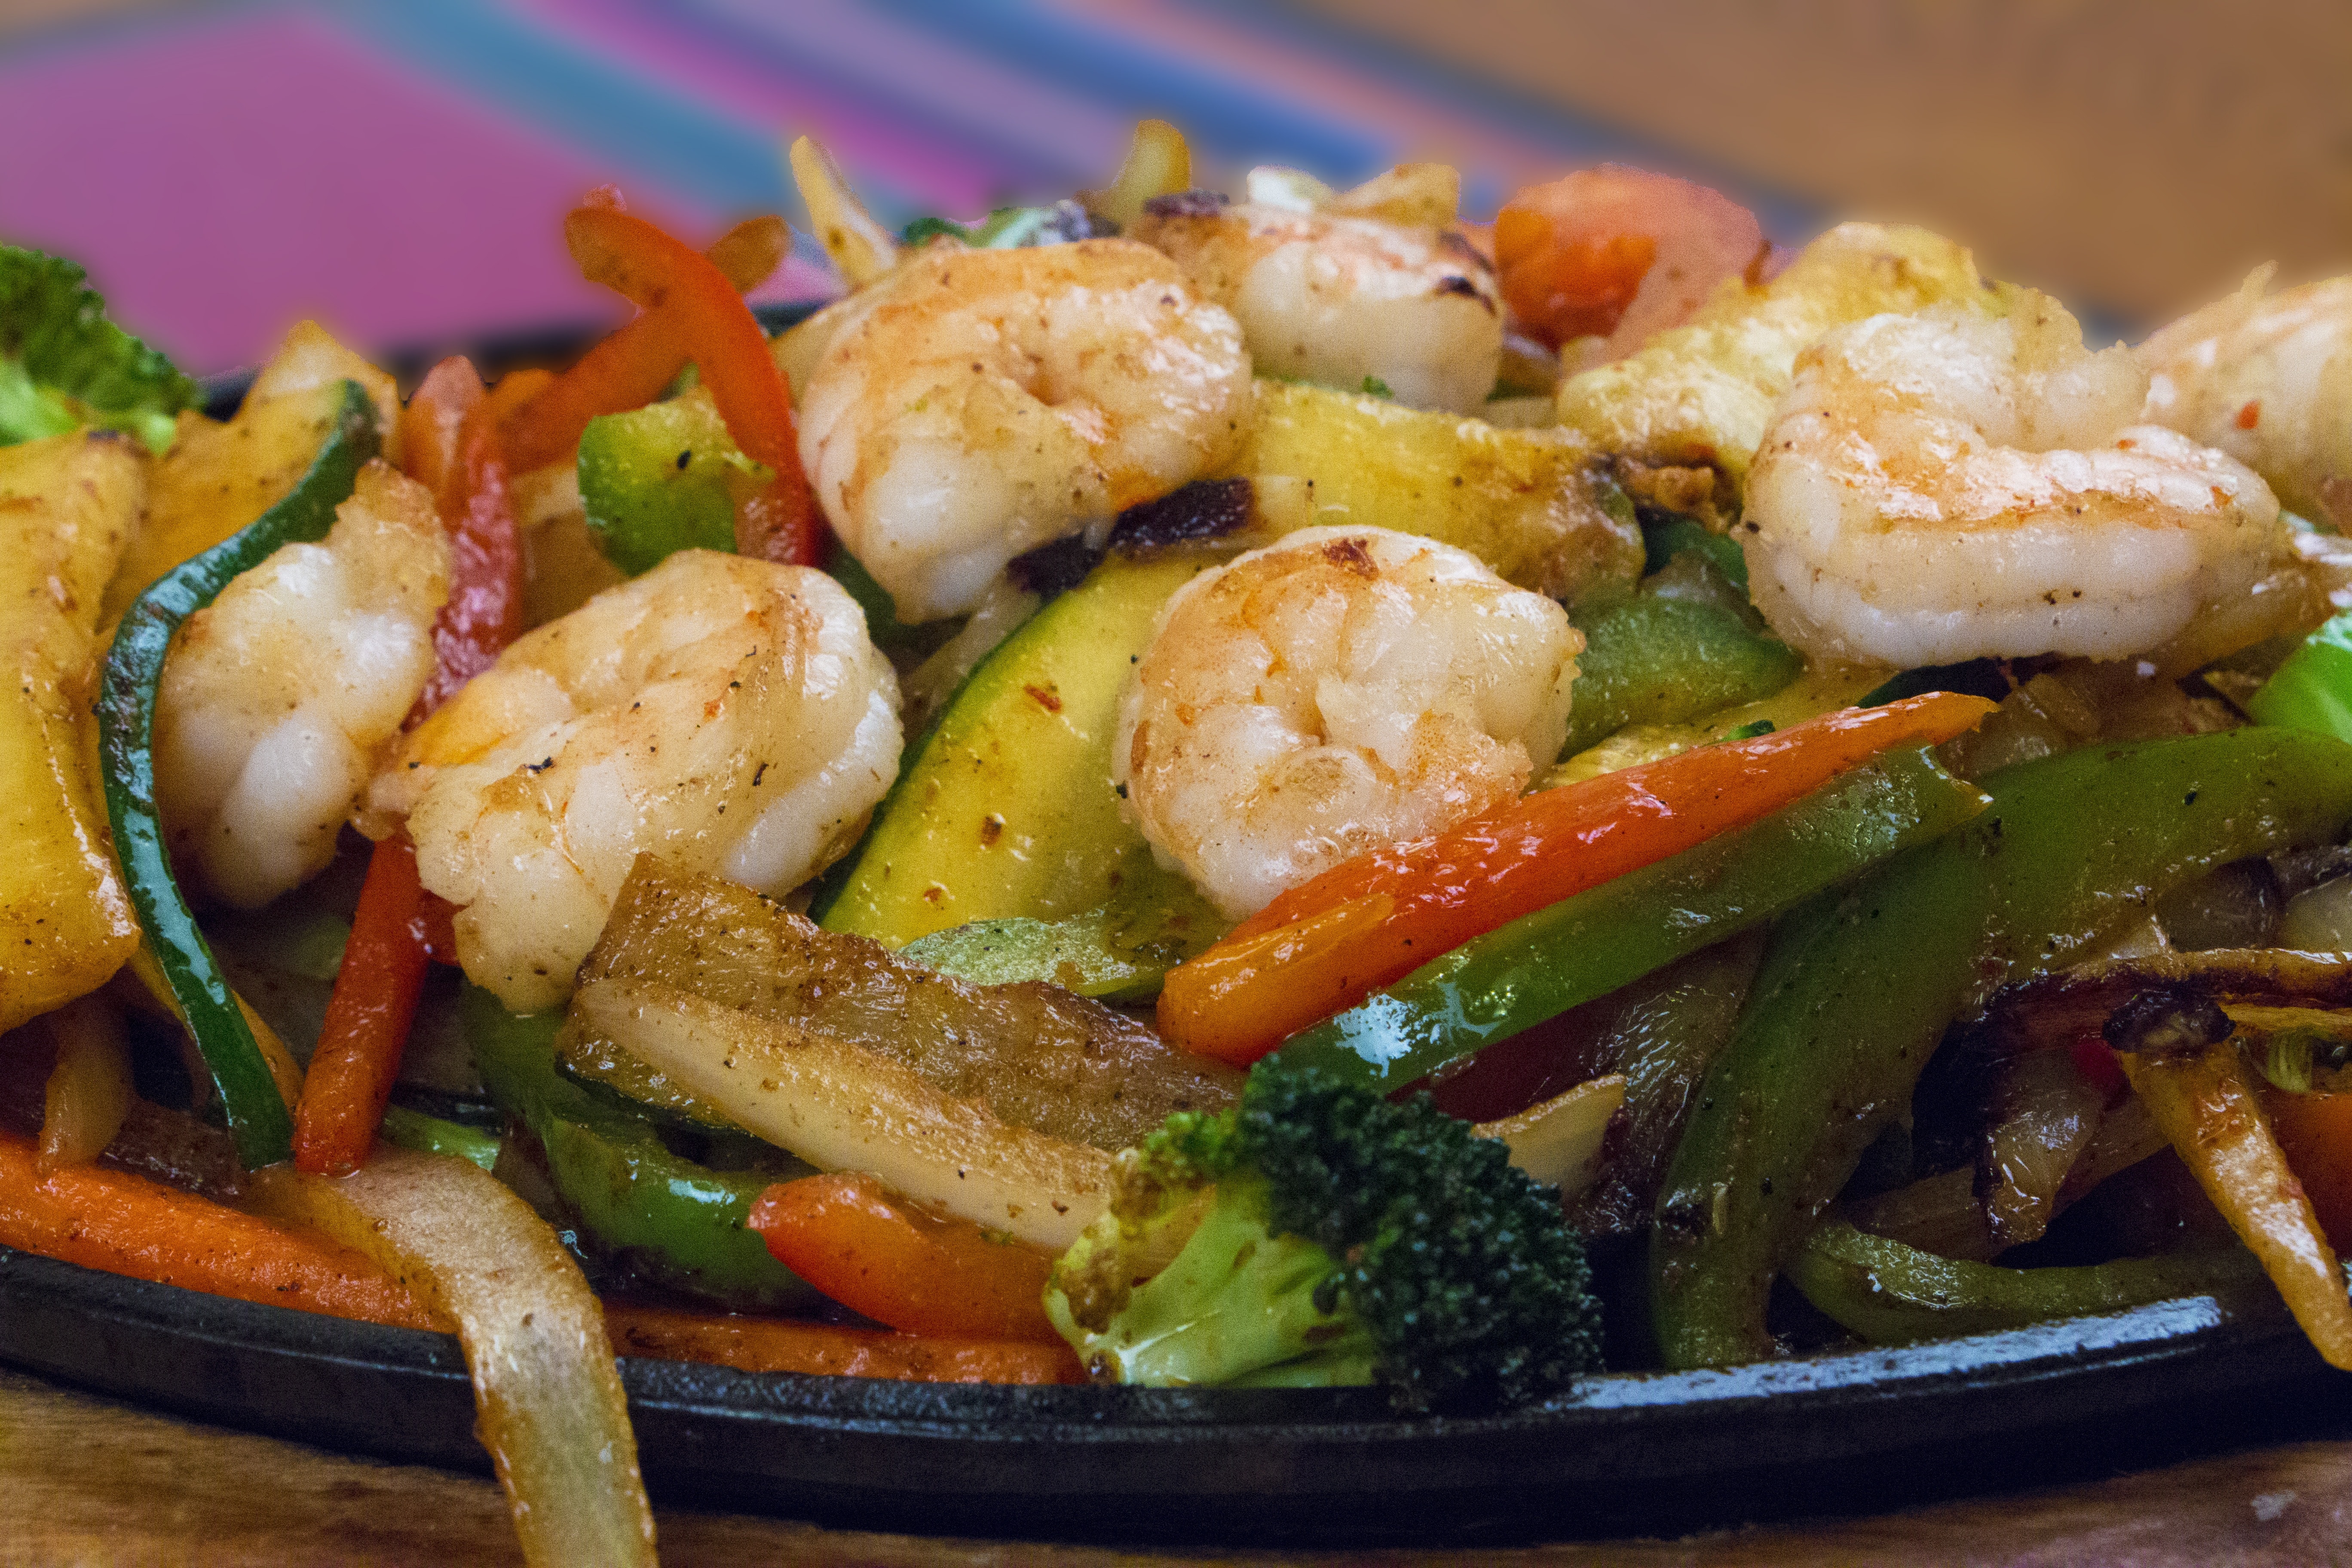 Shrimp, Seafood, Mexican Food, food and drink, healthy eating